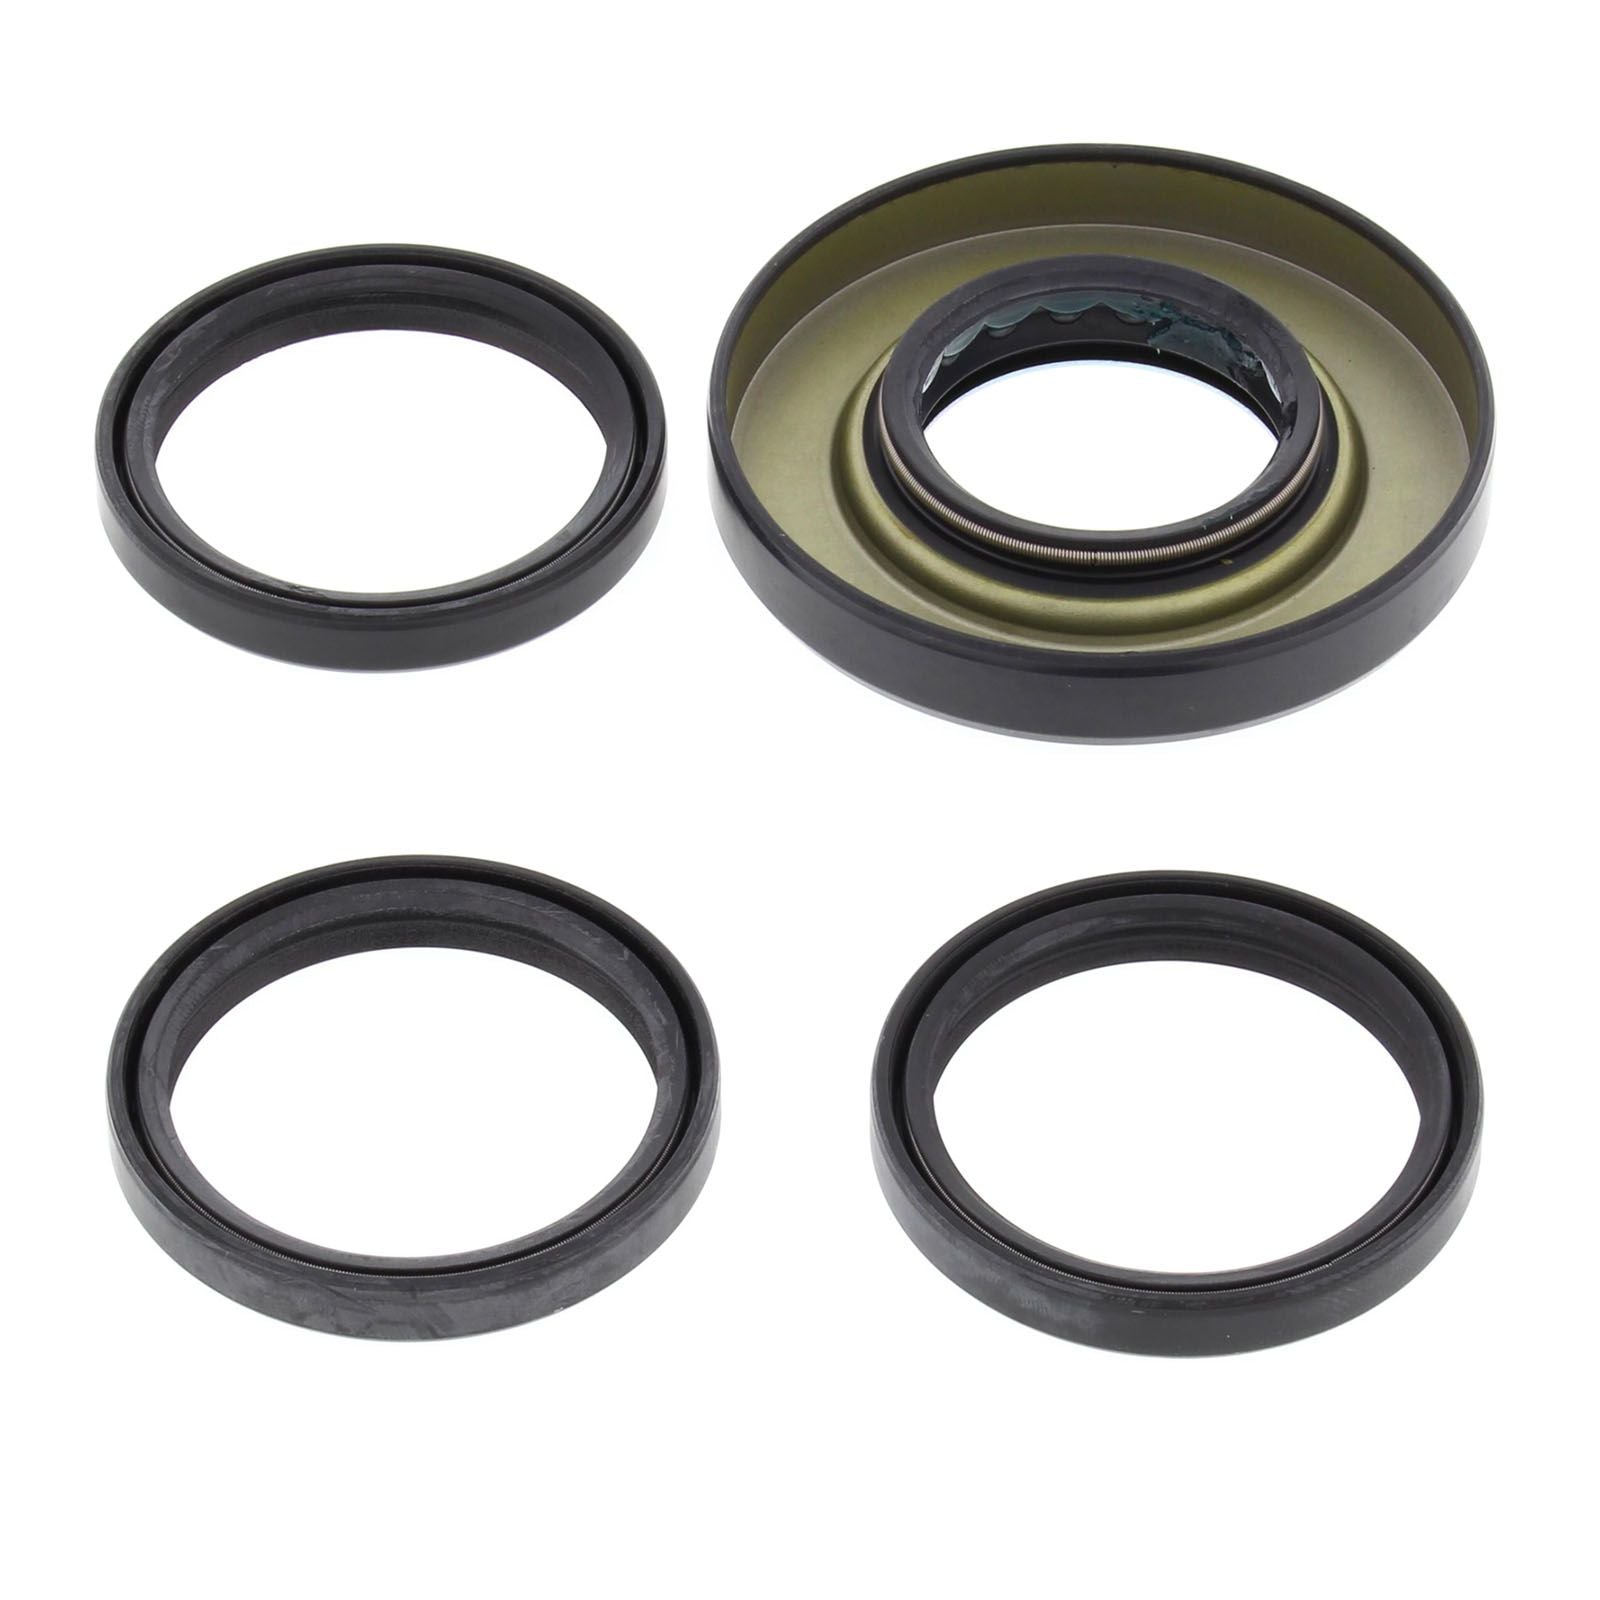 New ALL BALLS Racing Differential Seal Kit #AB2520095